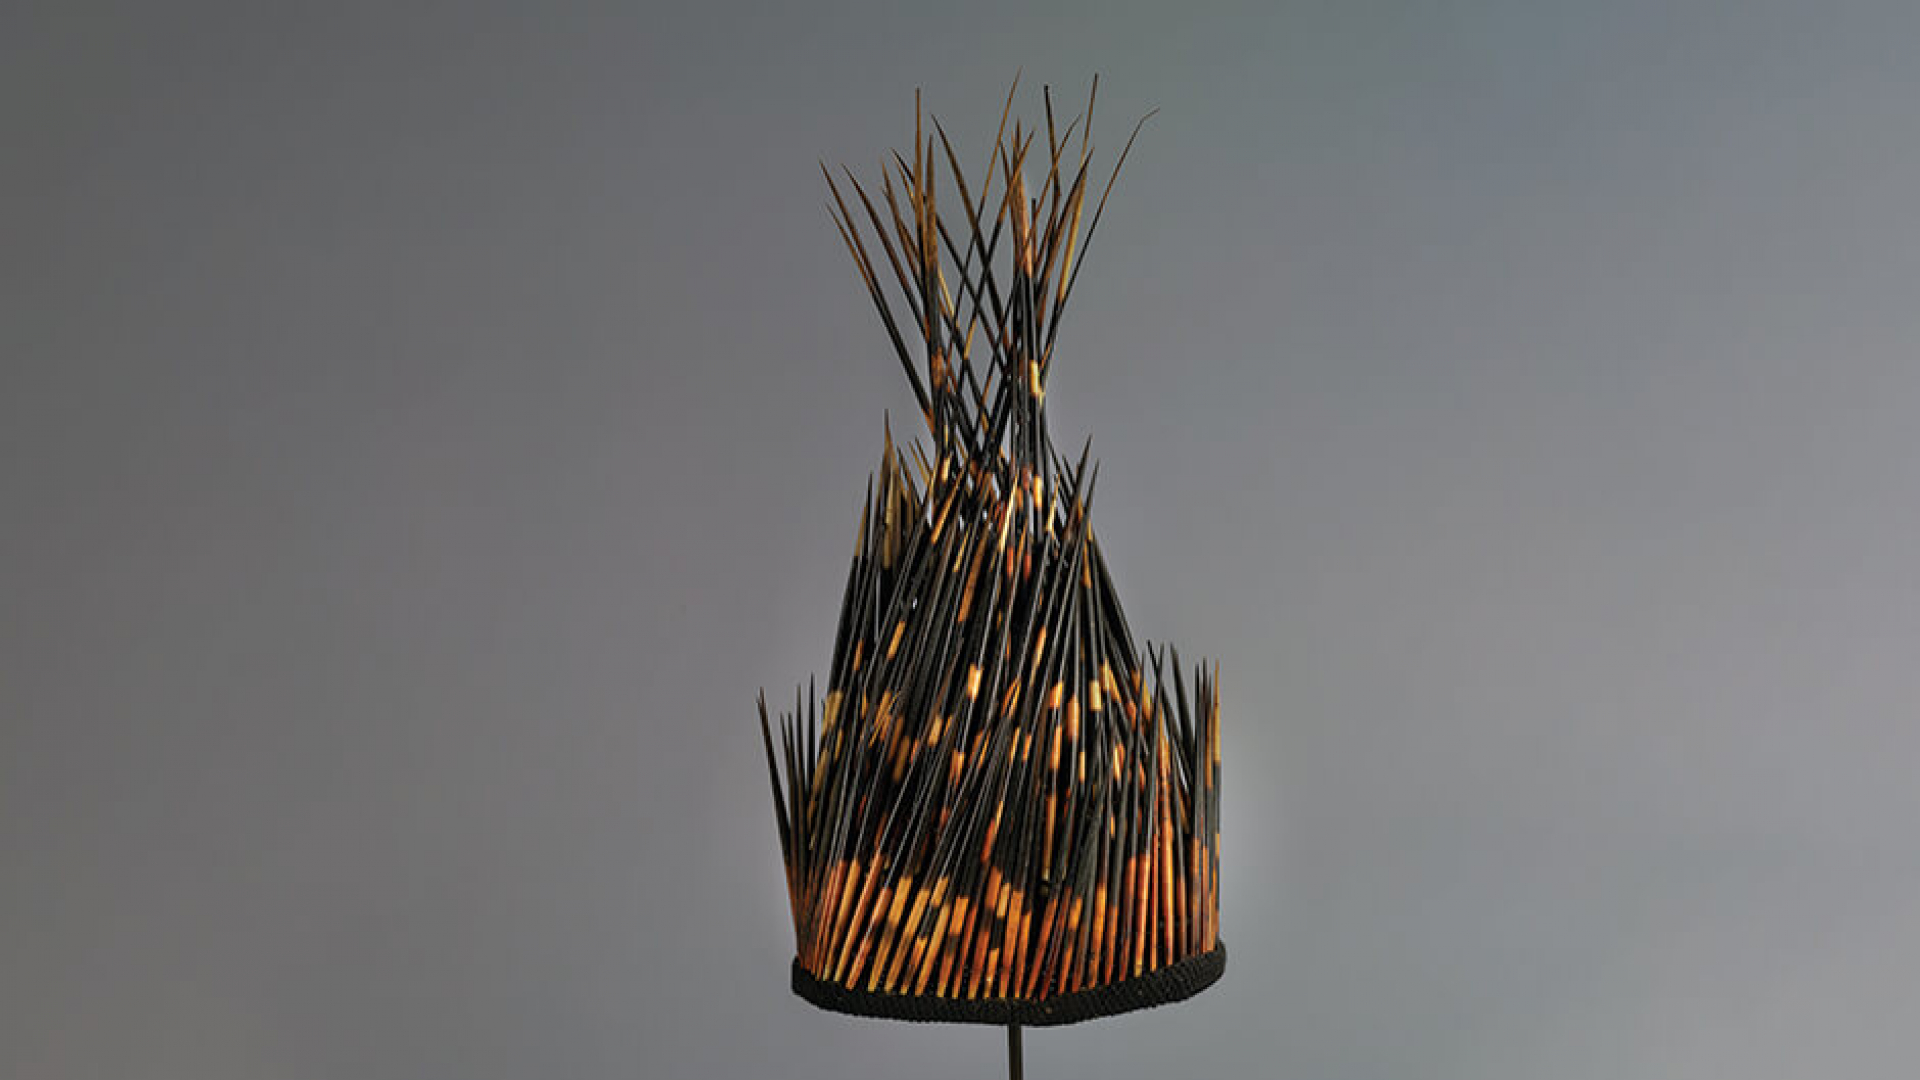 Ceremonial cap made from porcupine quills.